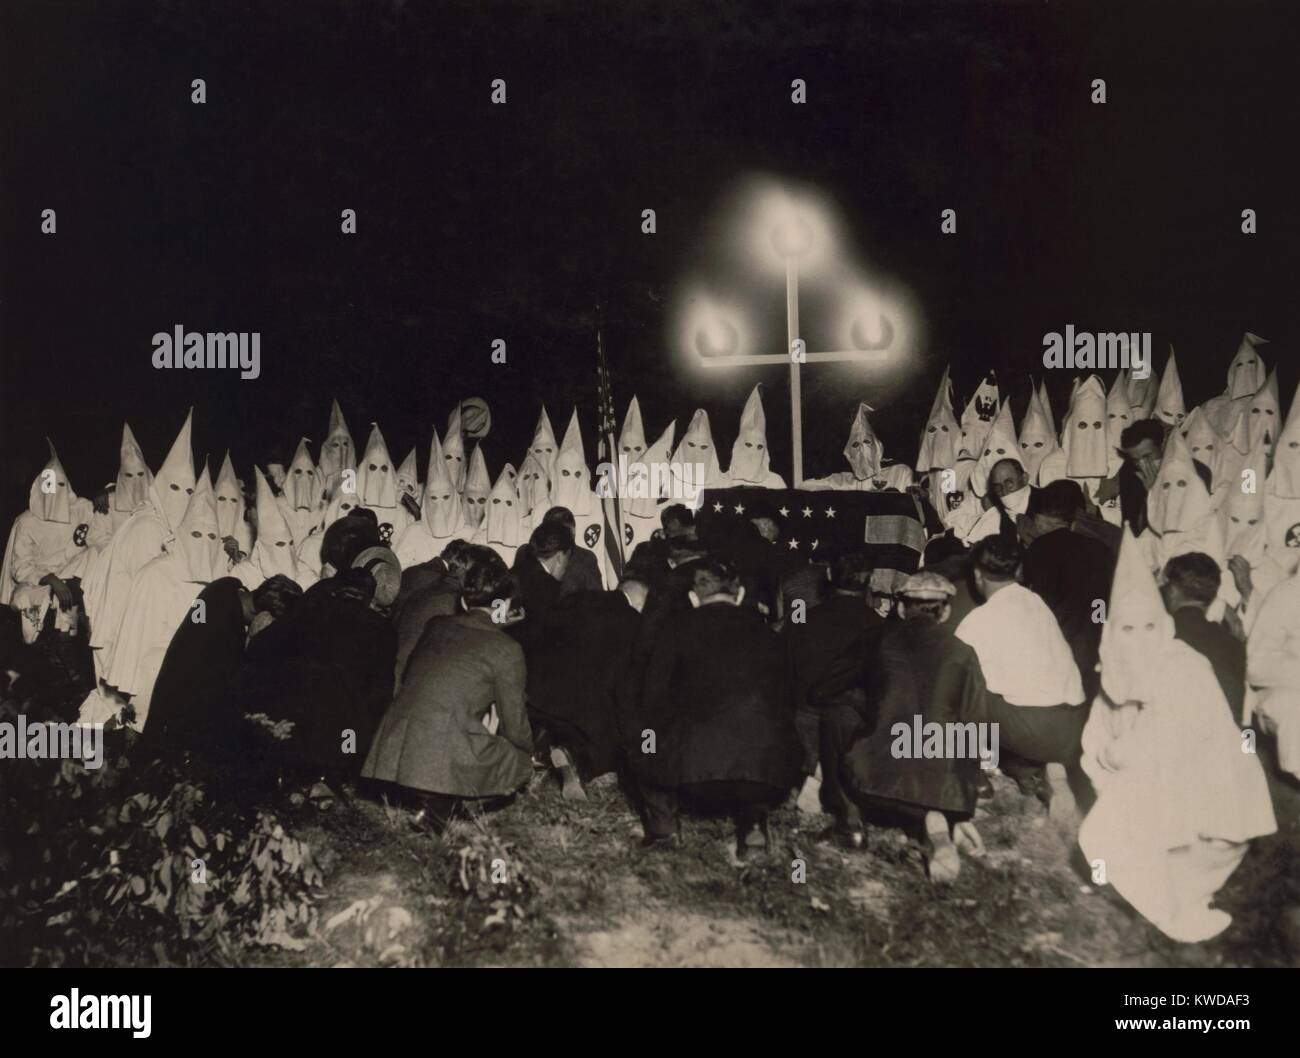 Ku Klux Klan gathered within two miles of the U.S. Capitol to receive new members, c. 1925-27. In the background are shrouded members, with the initiates kneeling in the foreground (BSLOC 2016 8 78) Stock Photo